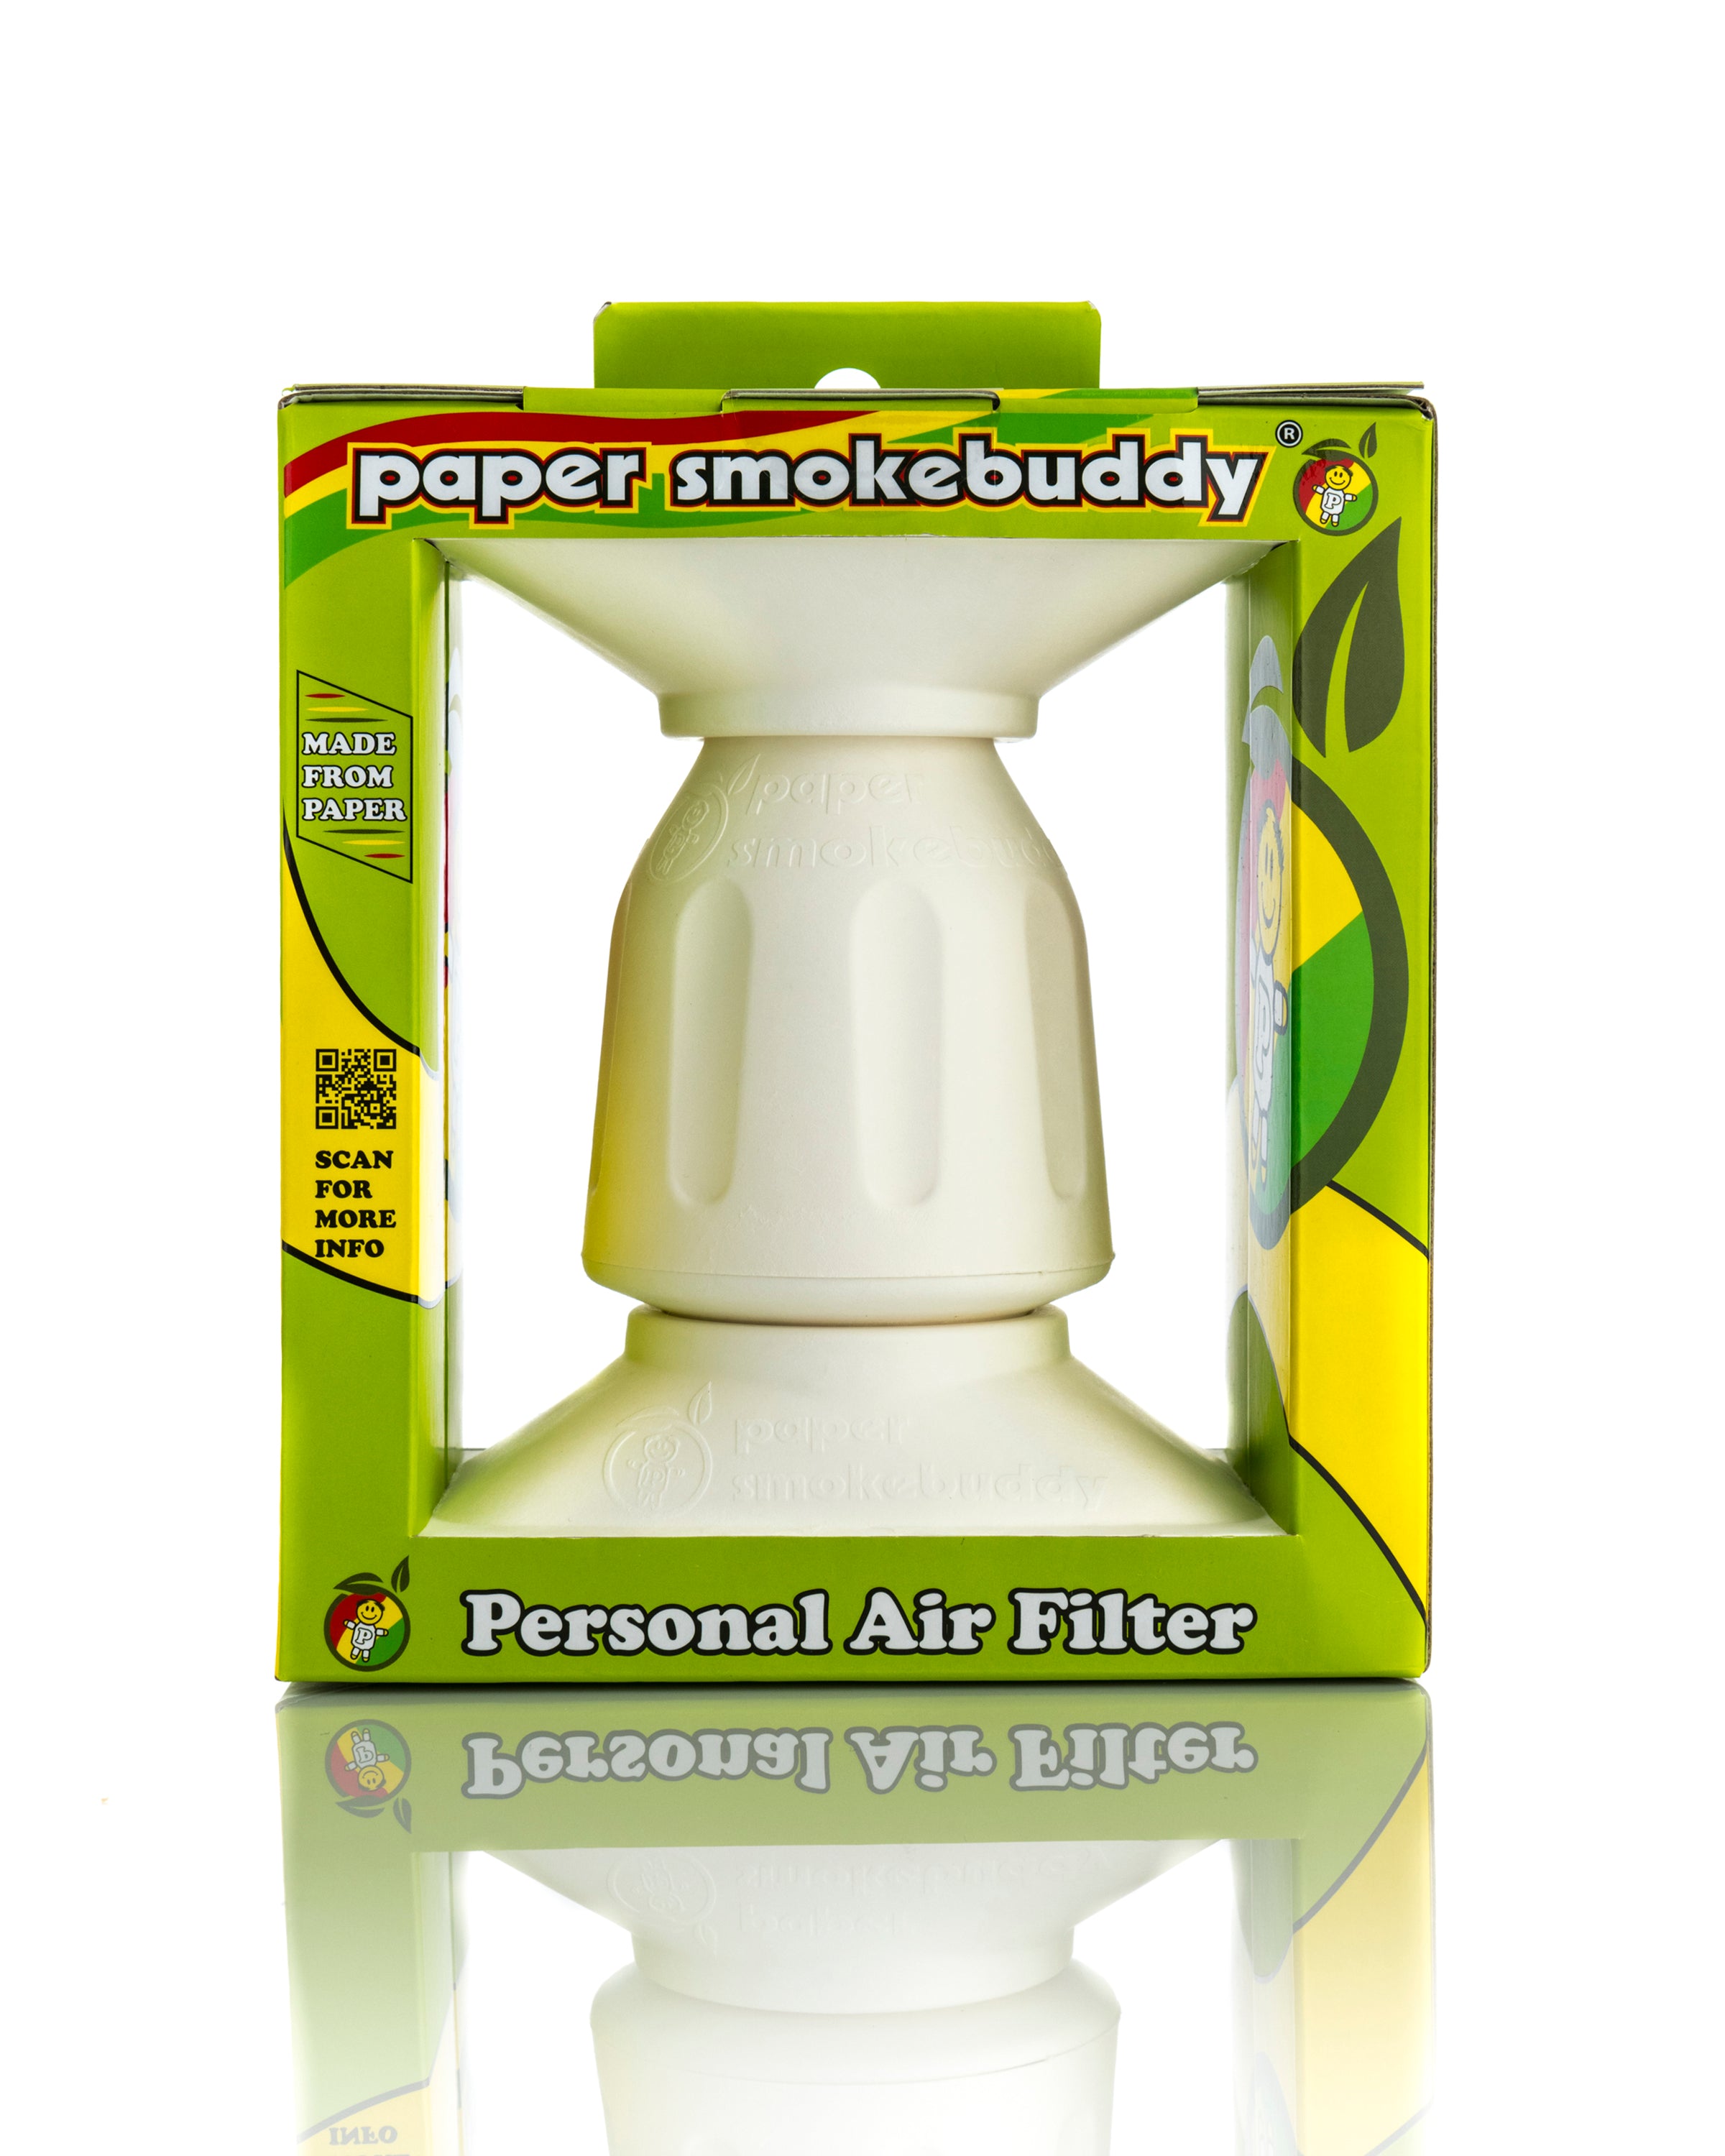 Smoke Buddy The Personal Air Filter - Sustainable Paper